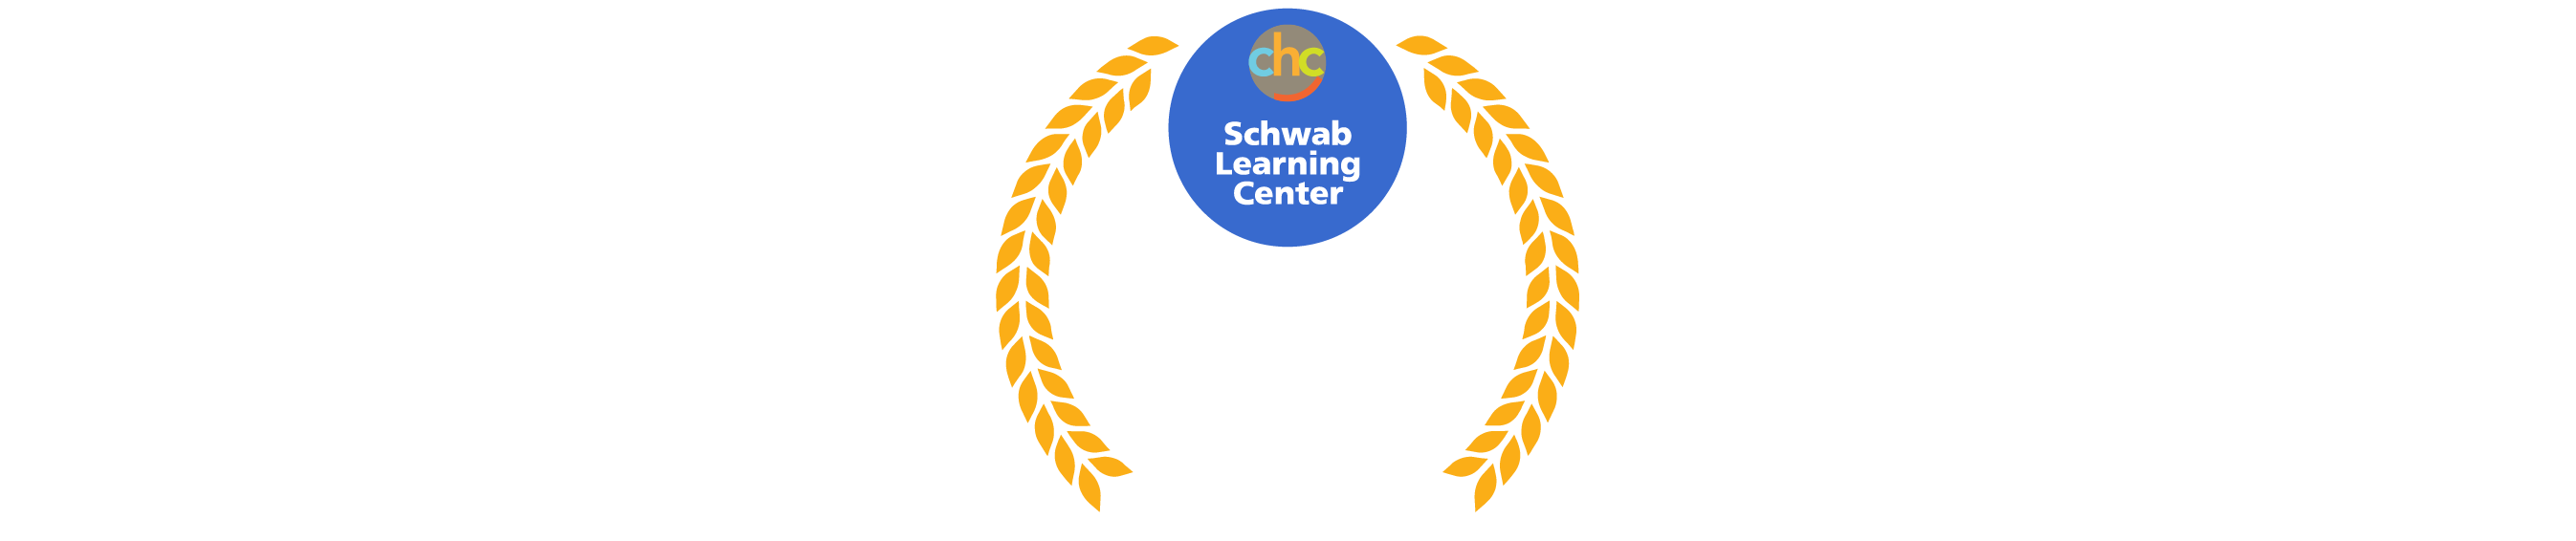 Schwab Learning Center. You. Empowered. High School & Beyond. Unlock your learning potential. New Student Introductory Offer! Get 6 hours of learning services at SLC for the price of 5! Learn More.